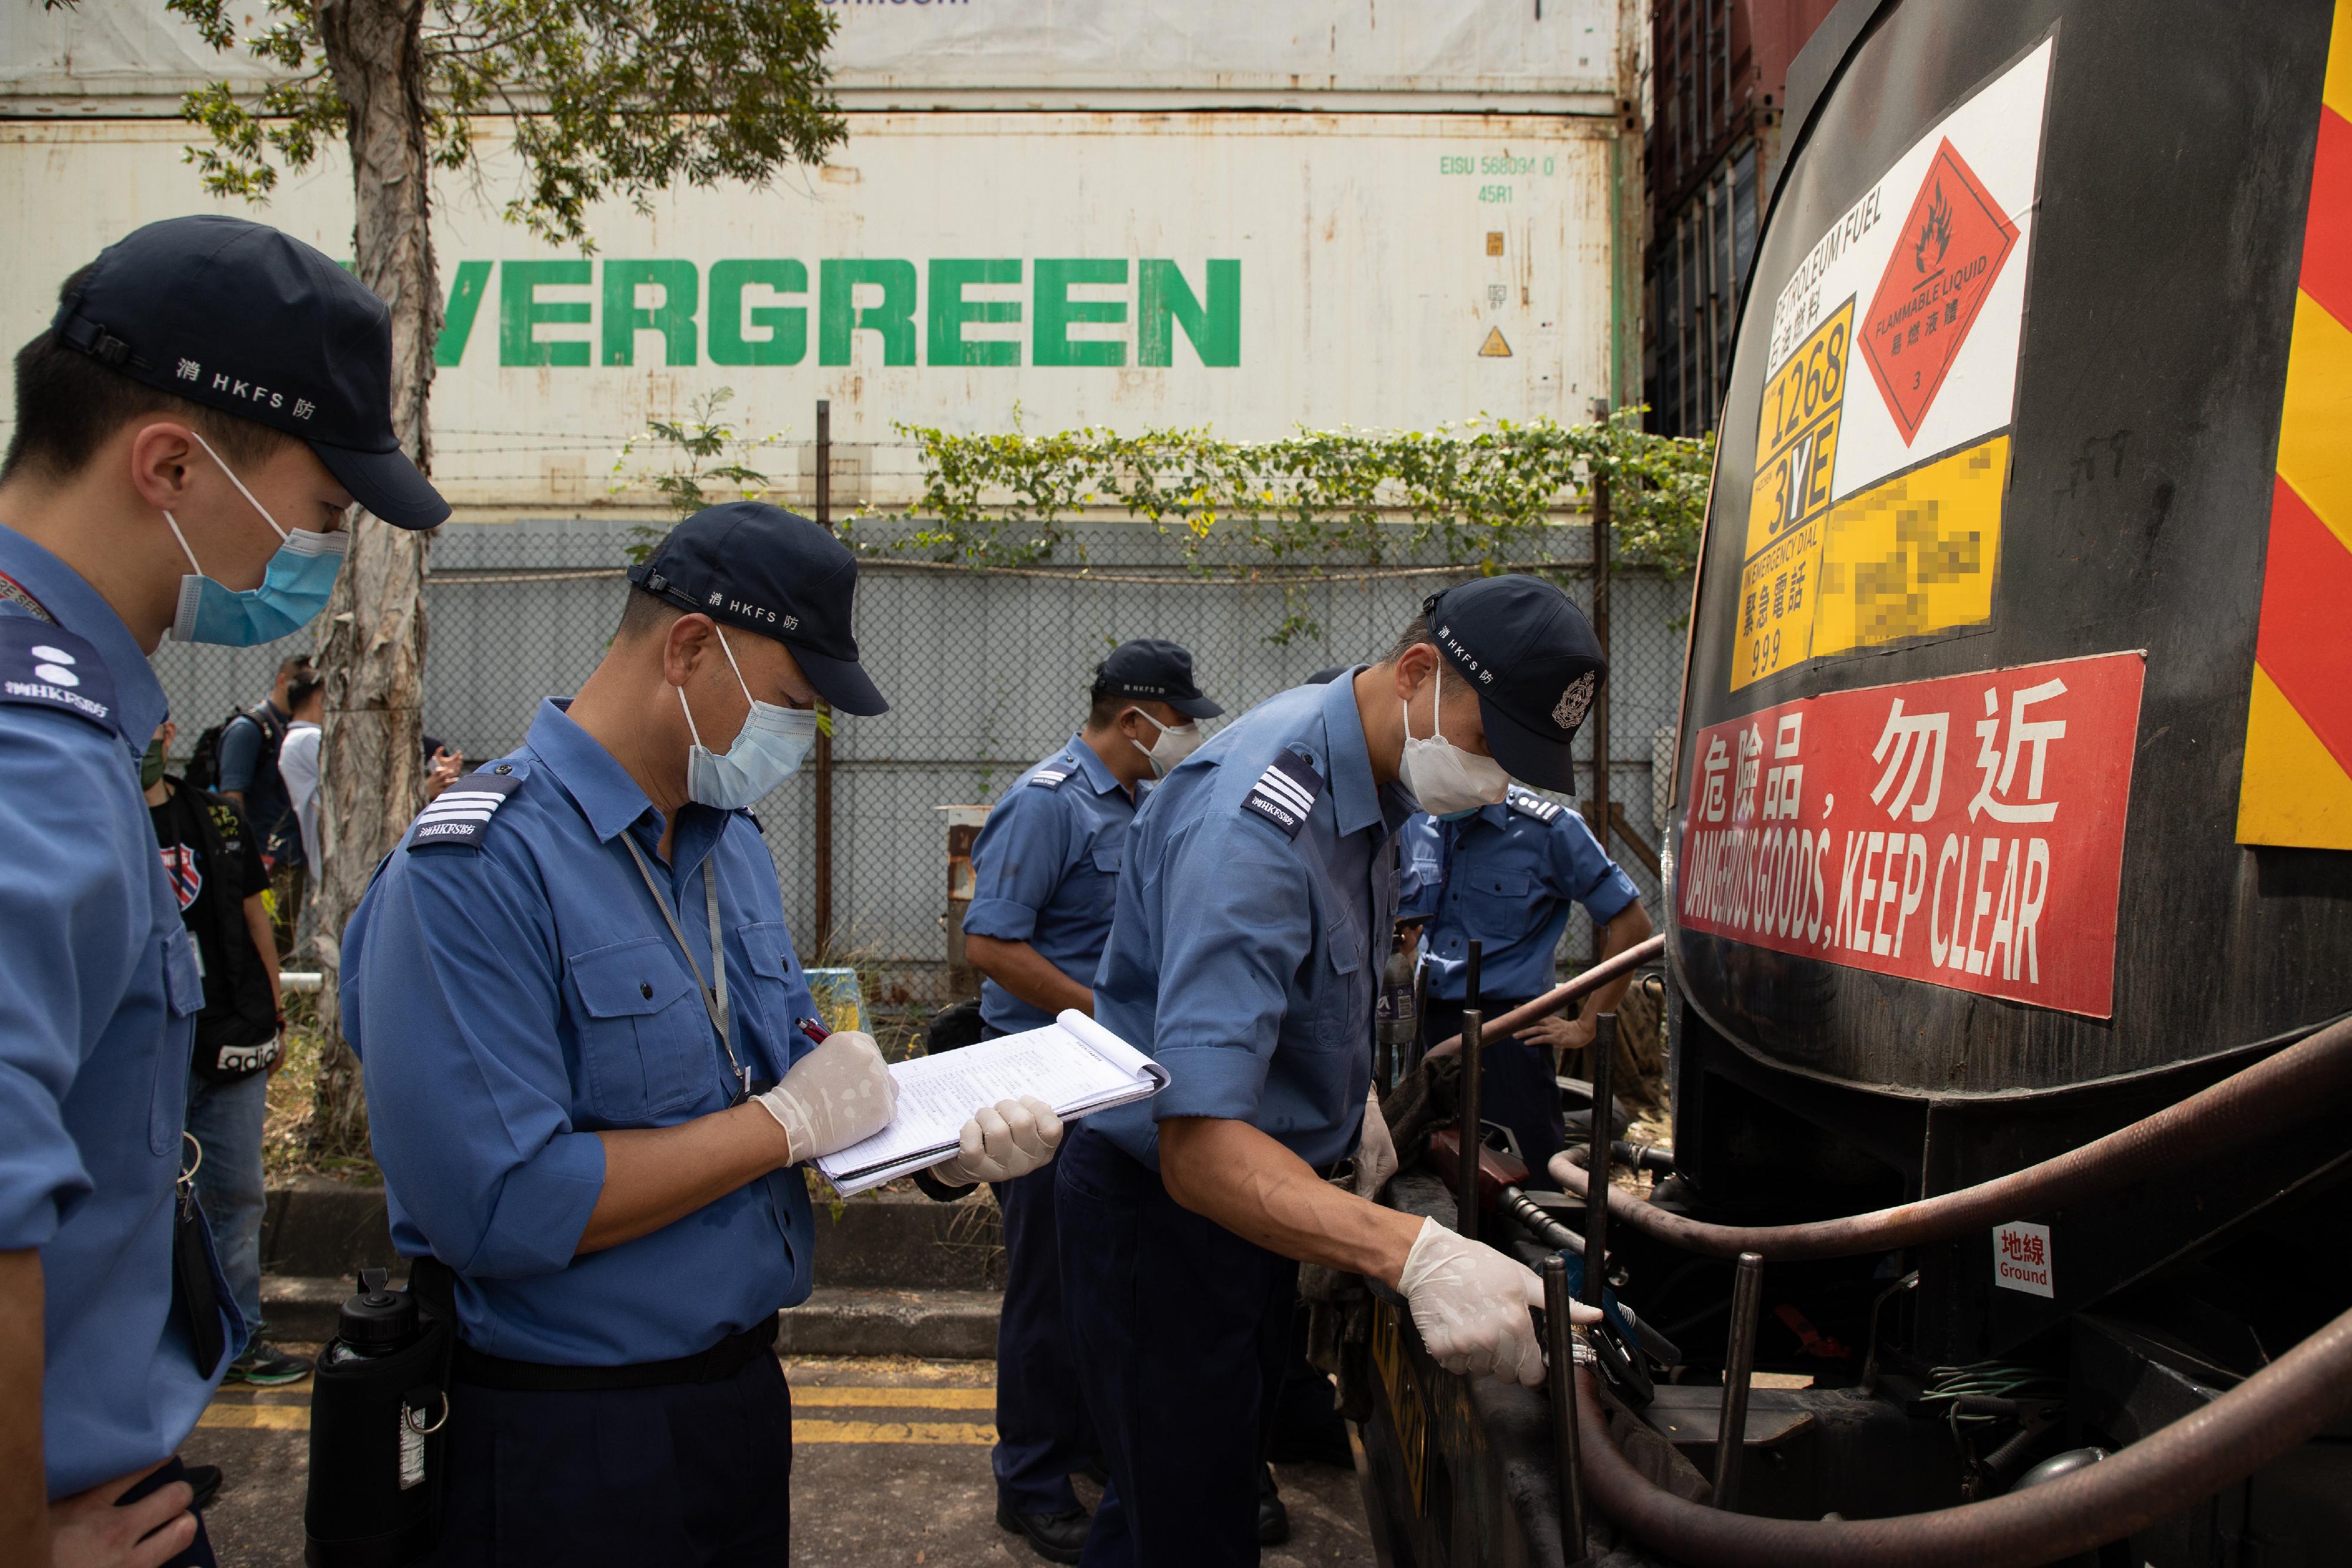 The Fire Services Department, the Hong Kong Police Force and Hong Kong Customs mounted a territory-wide joint operation codenamed "Fire Thunder" from September 27 to 29 to combat illicit fuelling activities. Photo shows FSD personnel inspecting dangerous goods vehicles at an illegal fuel filling station.
